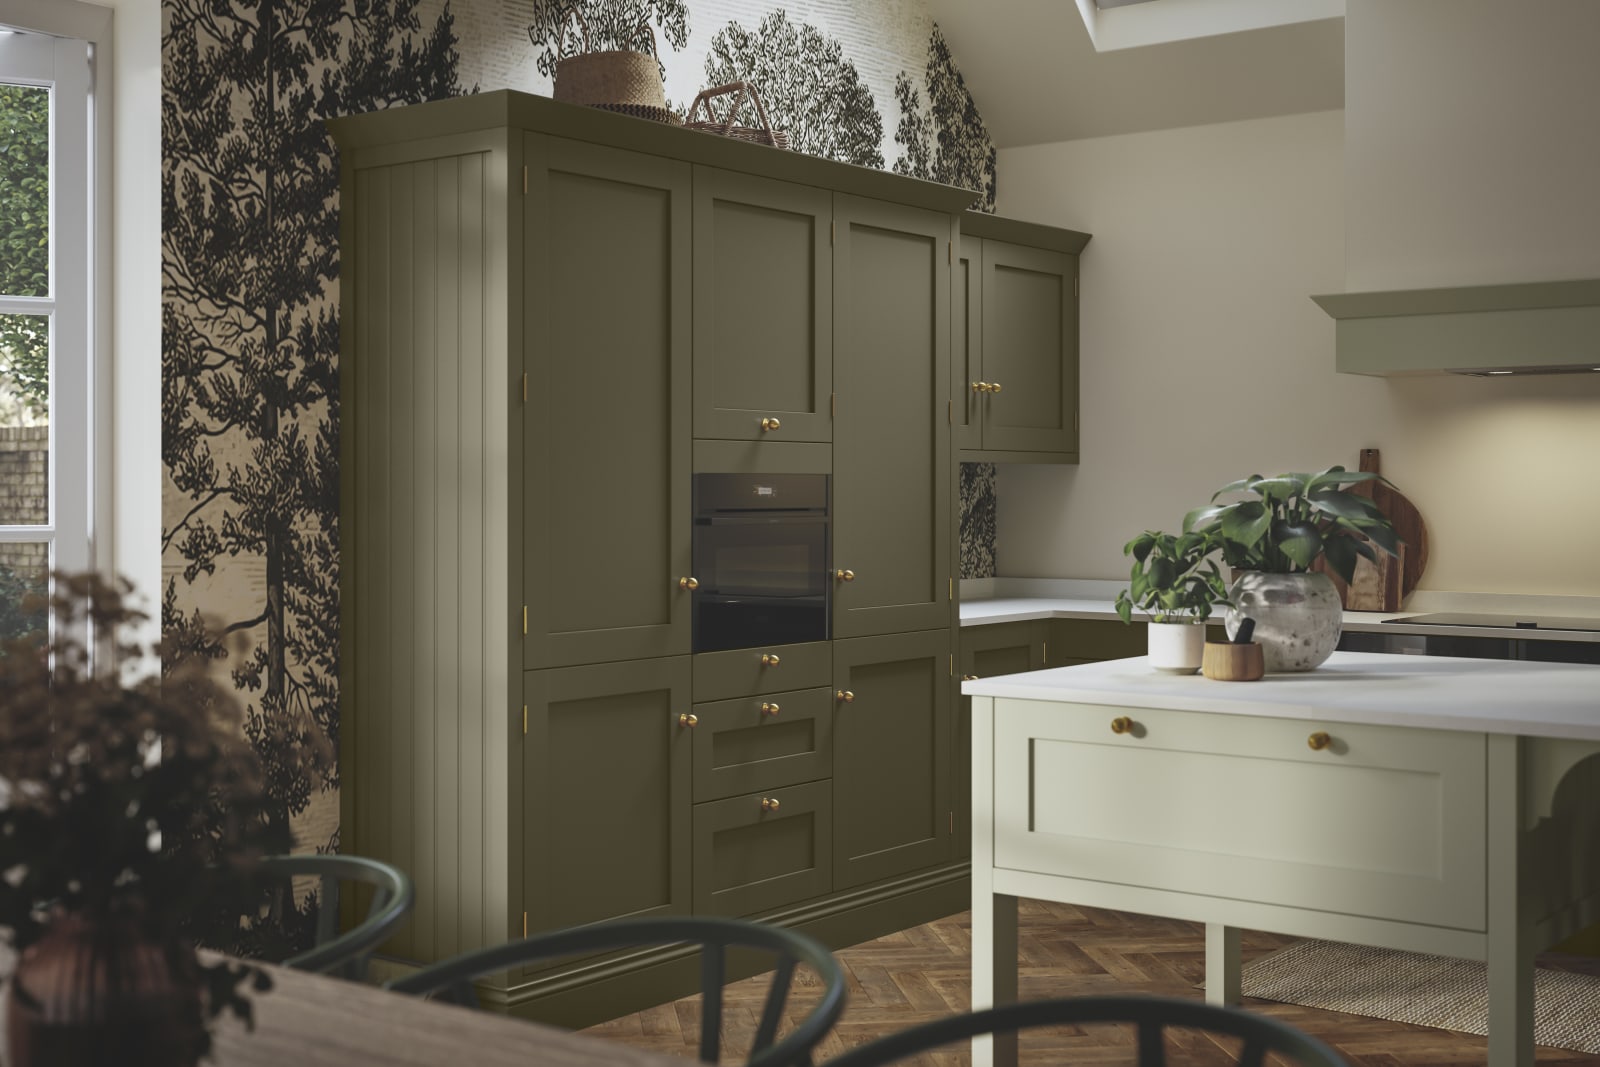 Tall Wardley Arboretum kitchen cabinets and a lighter kitchen island, all with brass details.